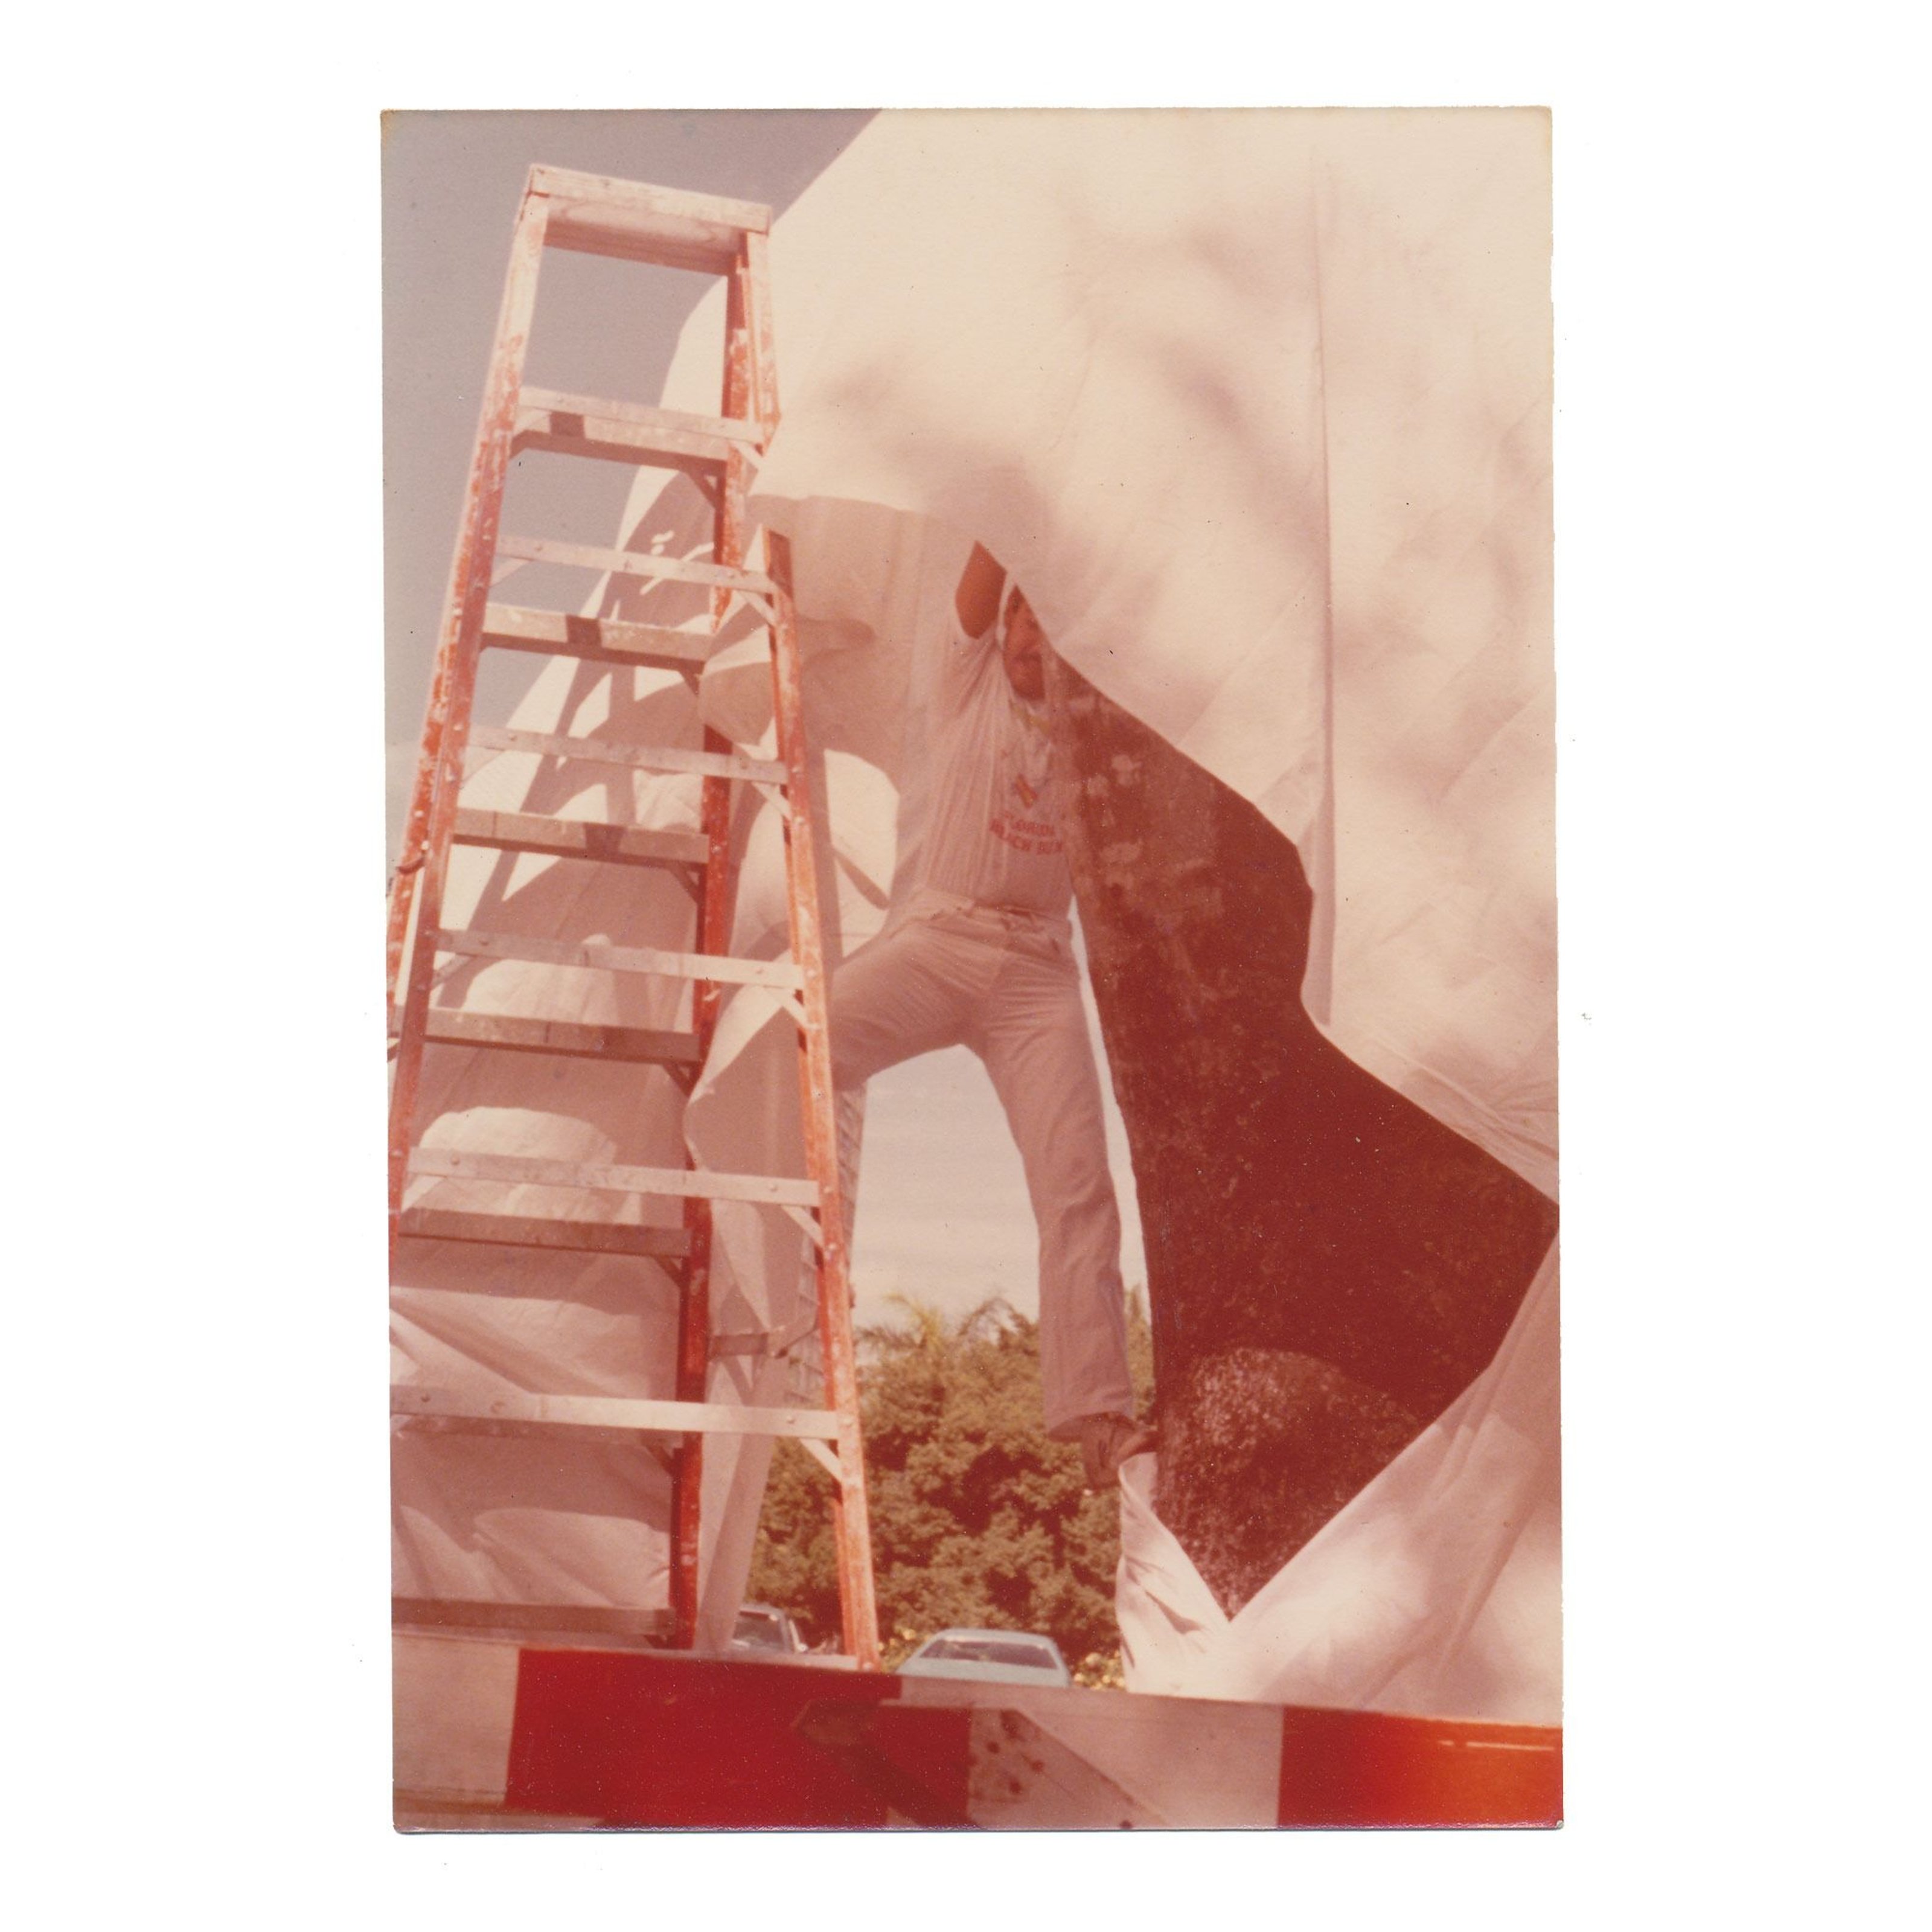 A man installing a sculpture, one foot on a ladder and another lifting off the tarp from a stone structure